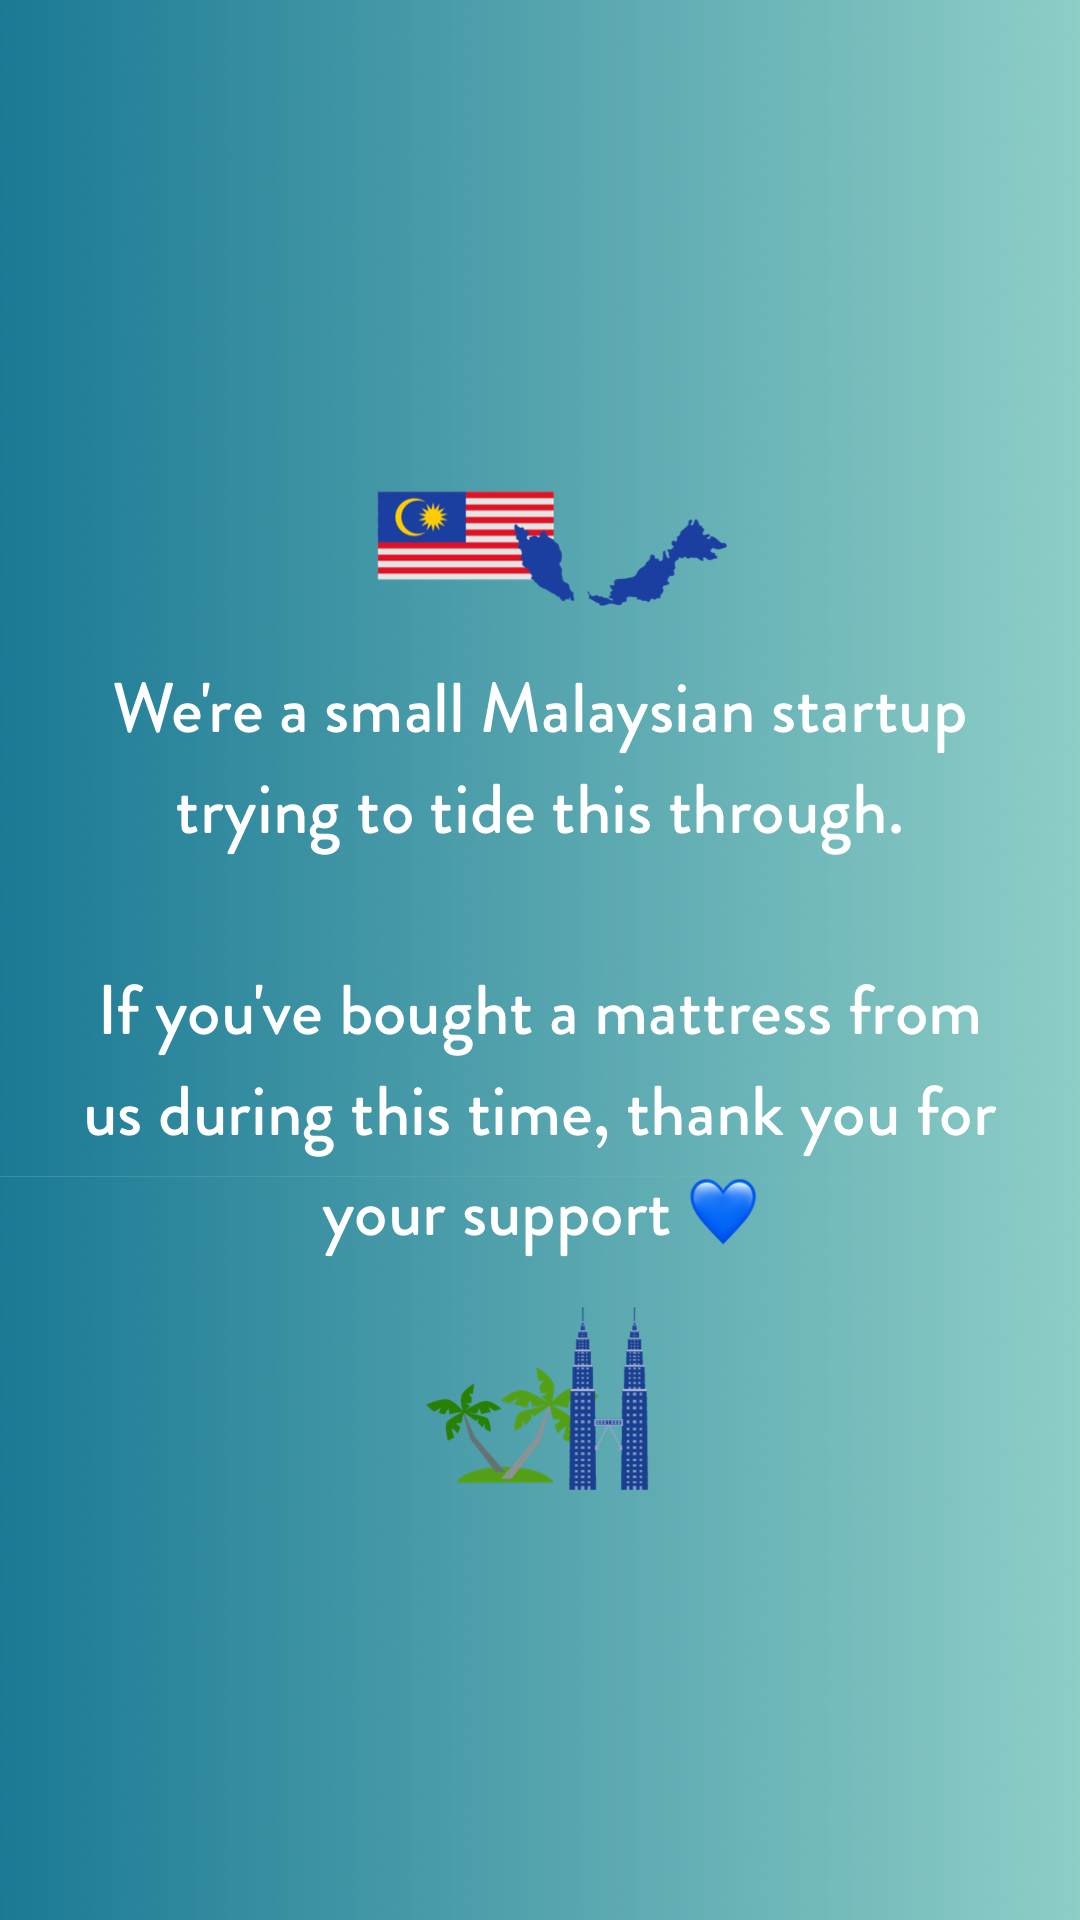 We're a small Malaysian startup trying to tide this through.